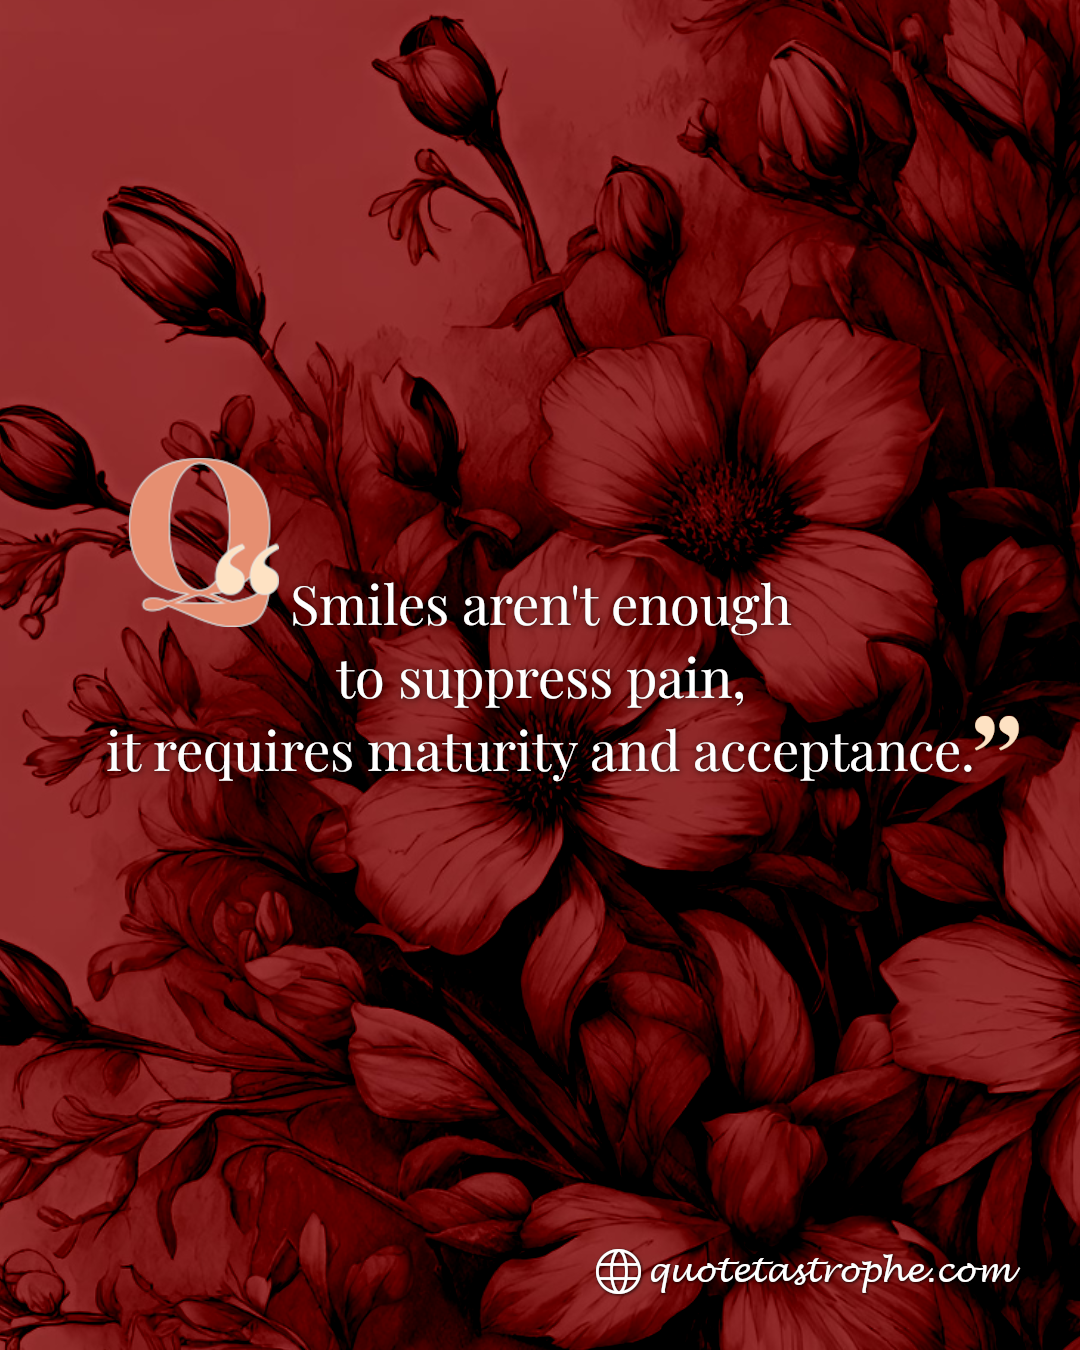 Smiles aren't Enough to Suppress Pain, Maturity Does